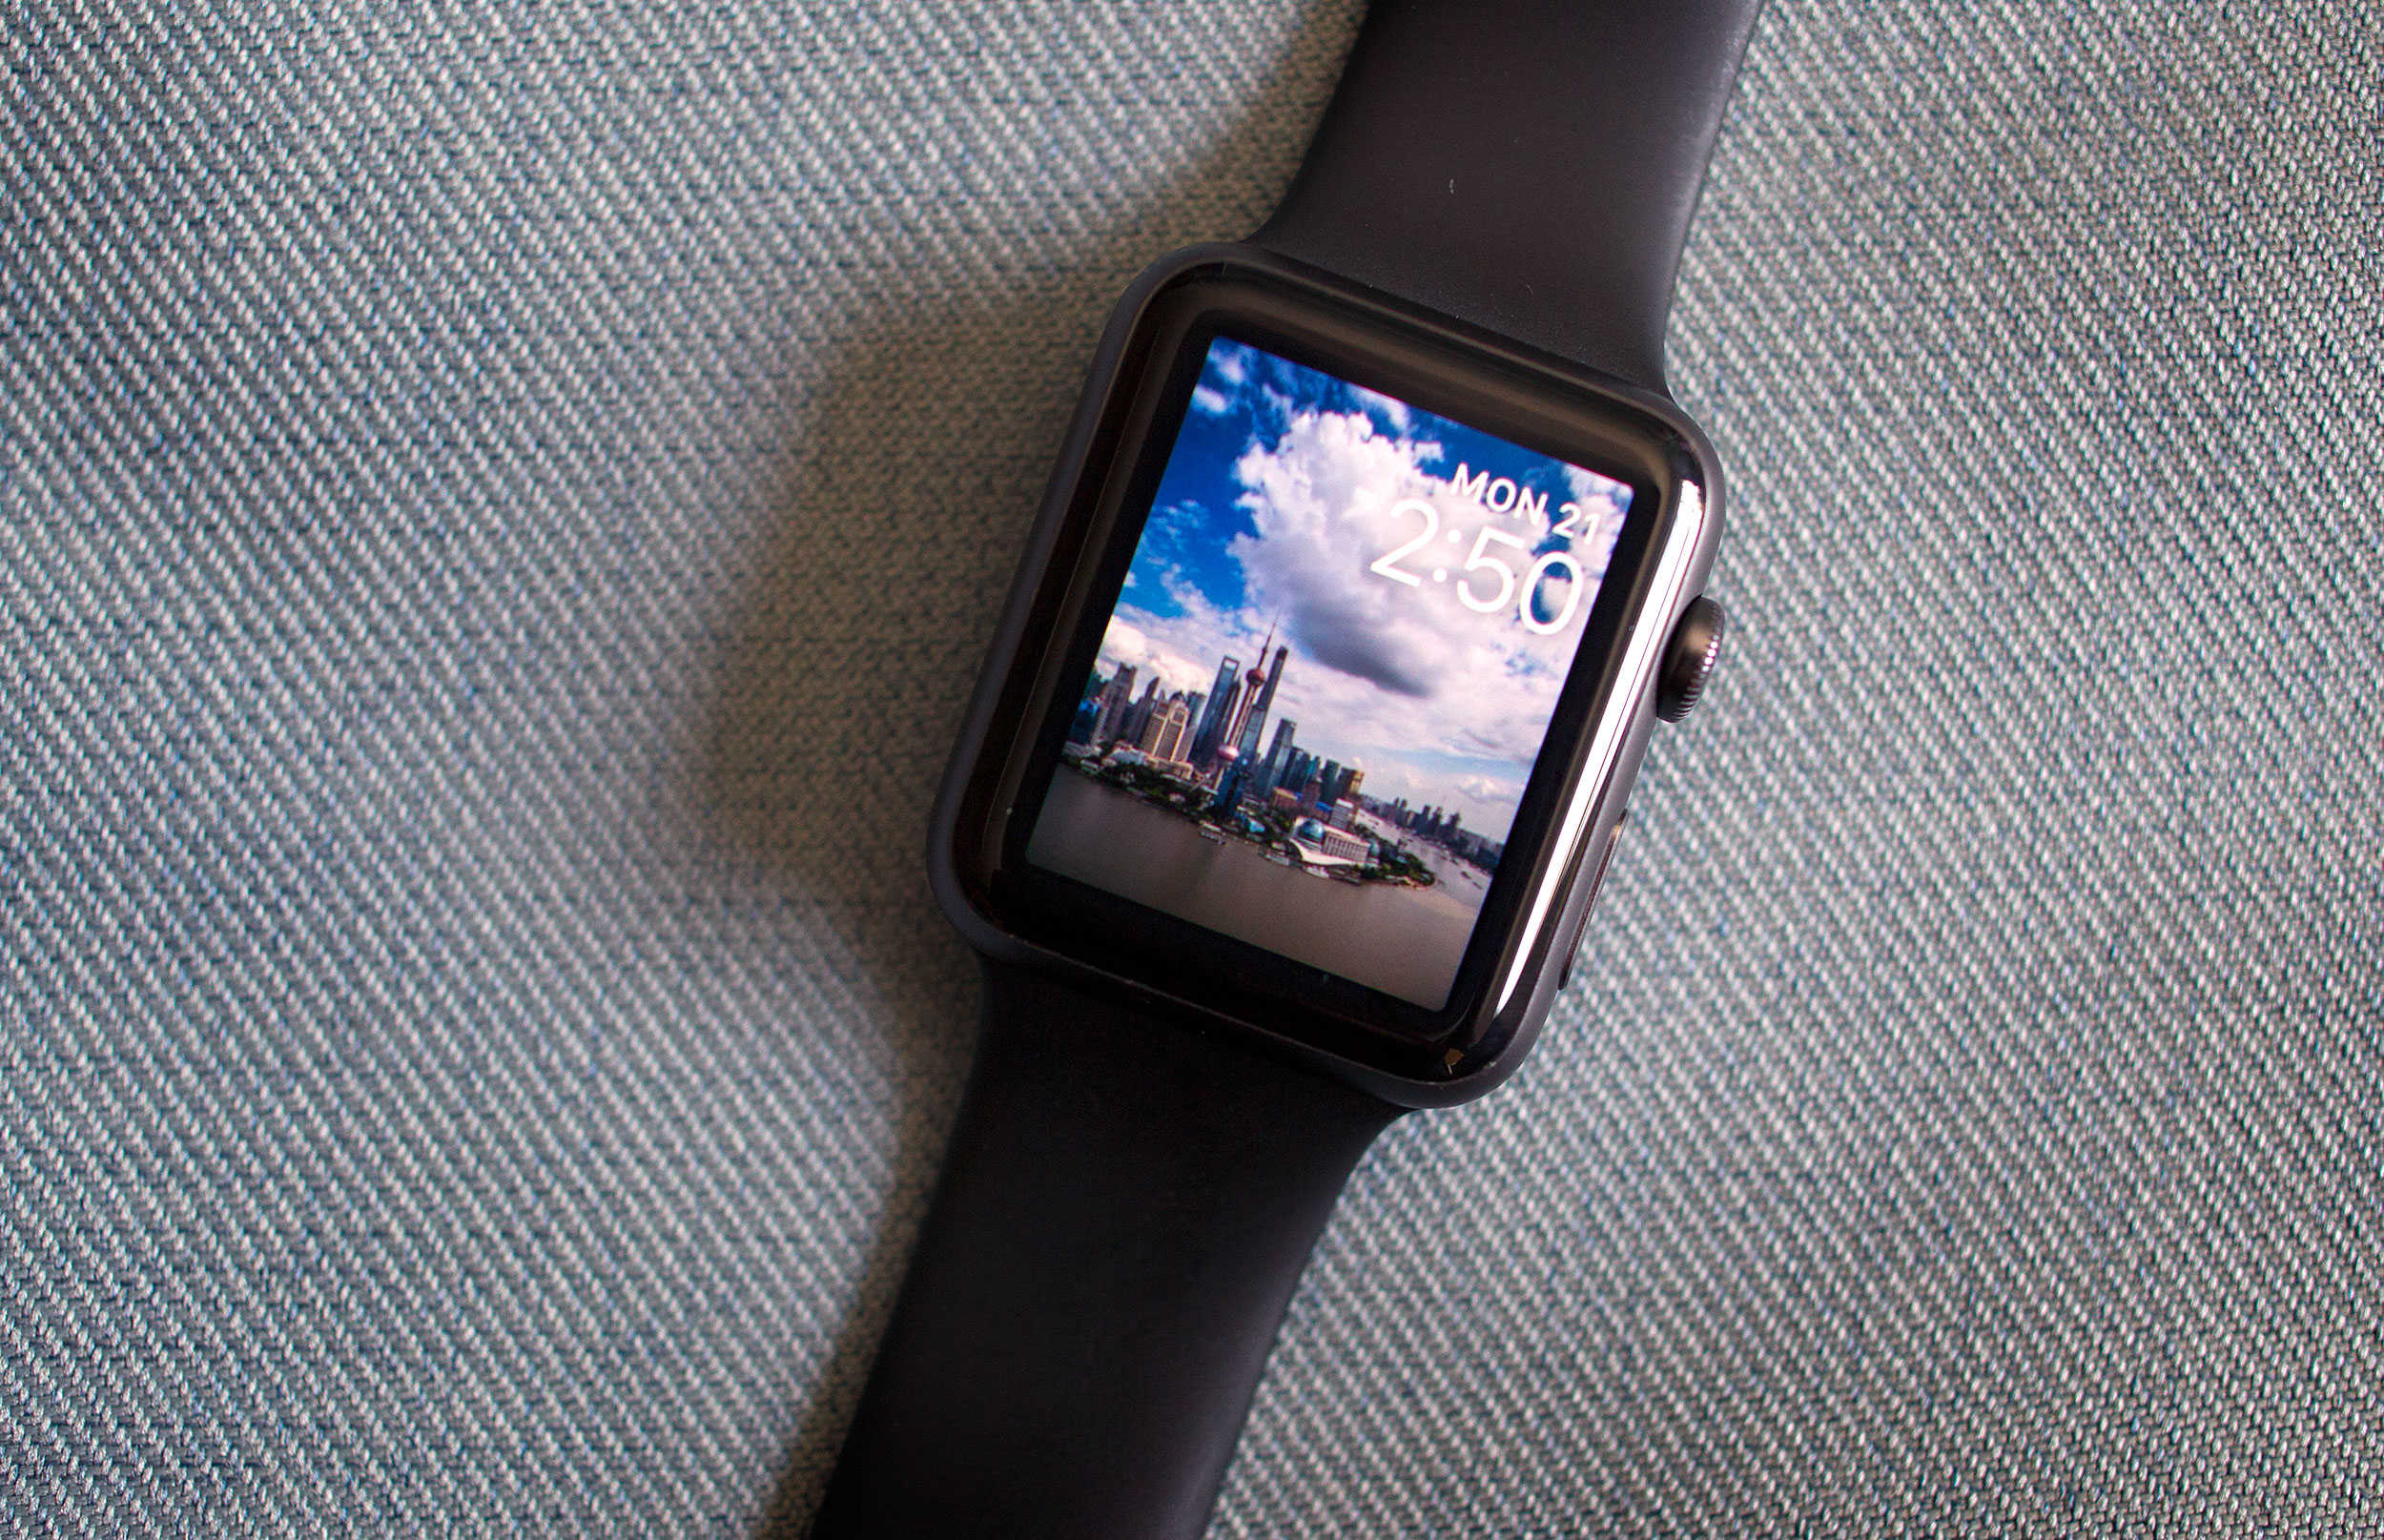 Apple Watch is a killer device, even without a 